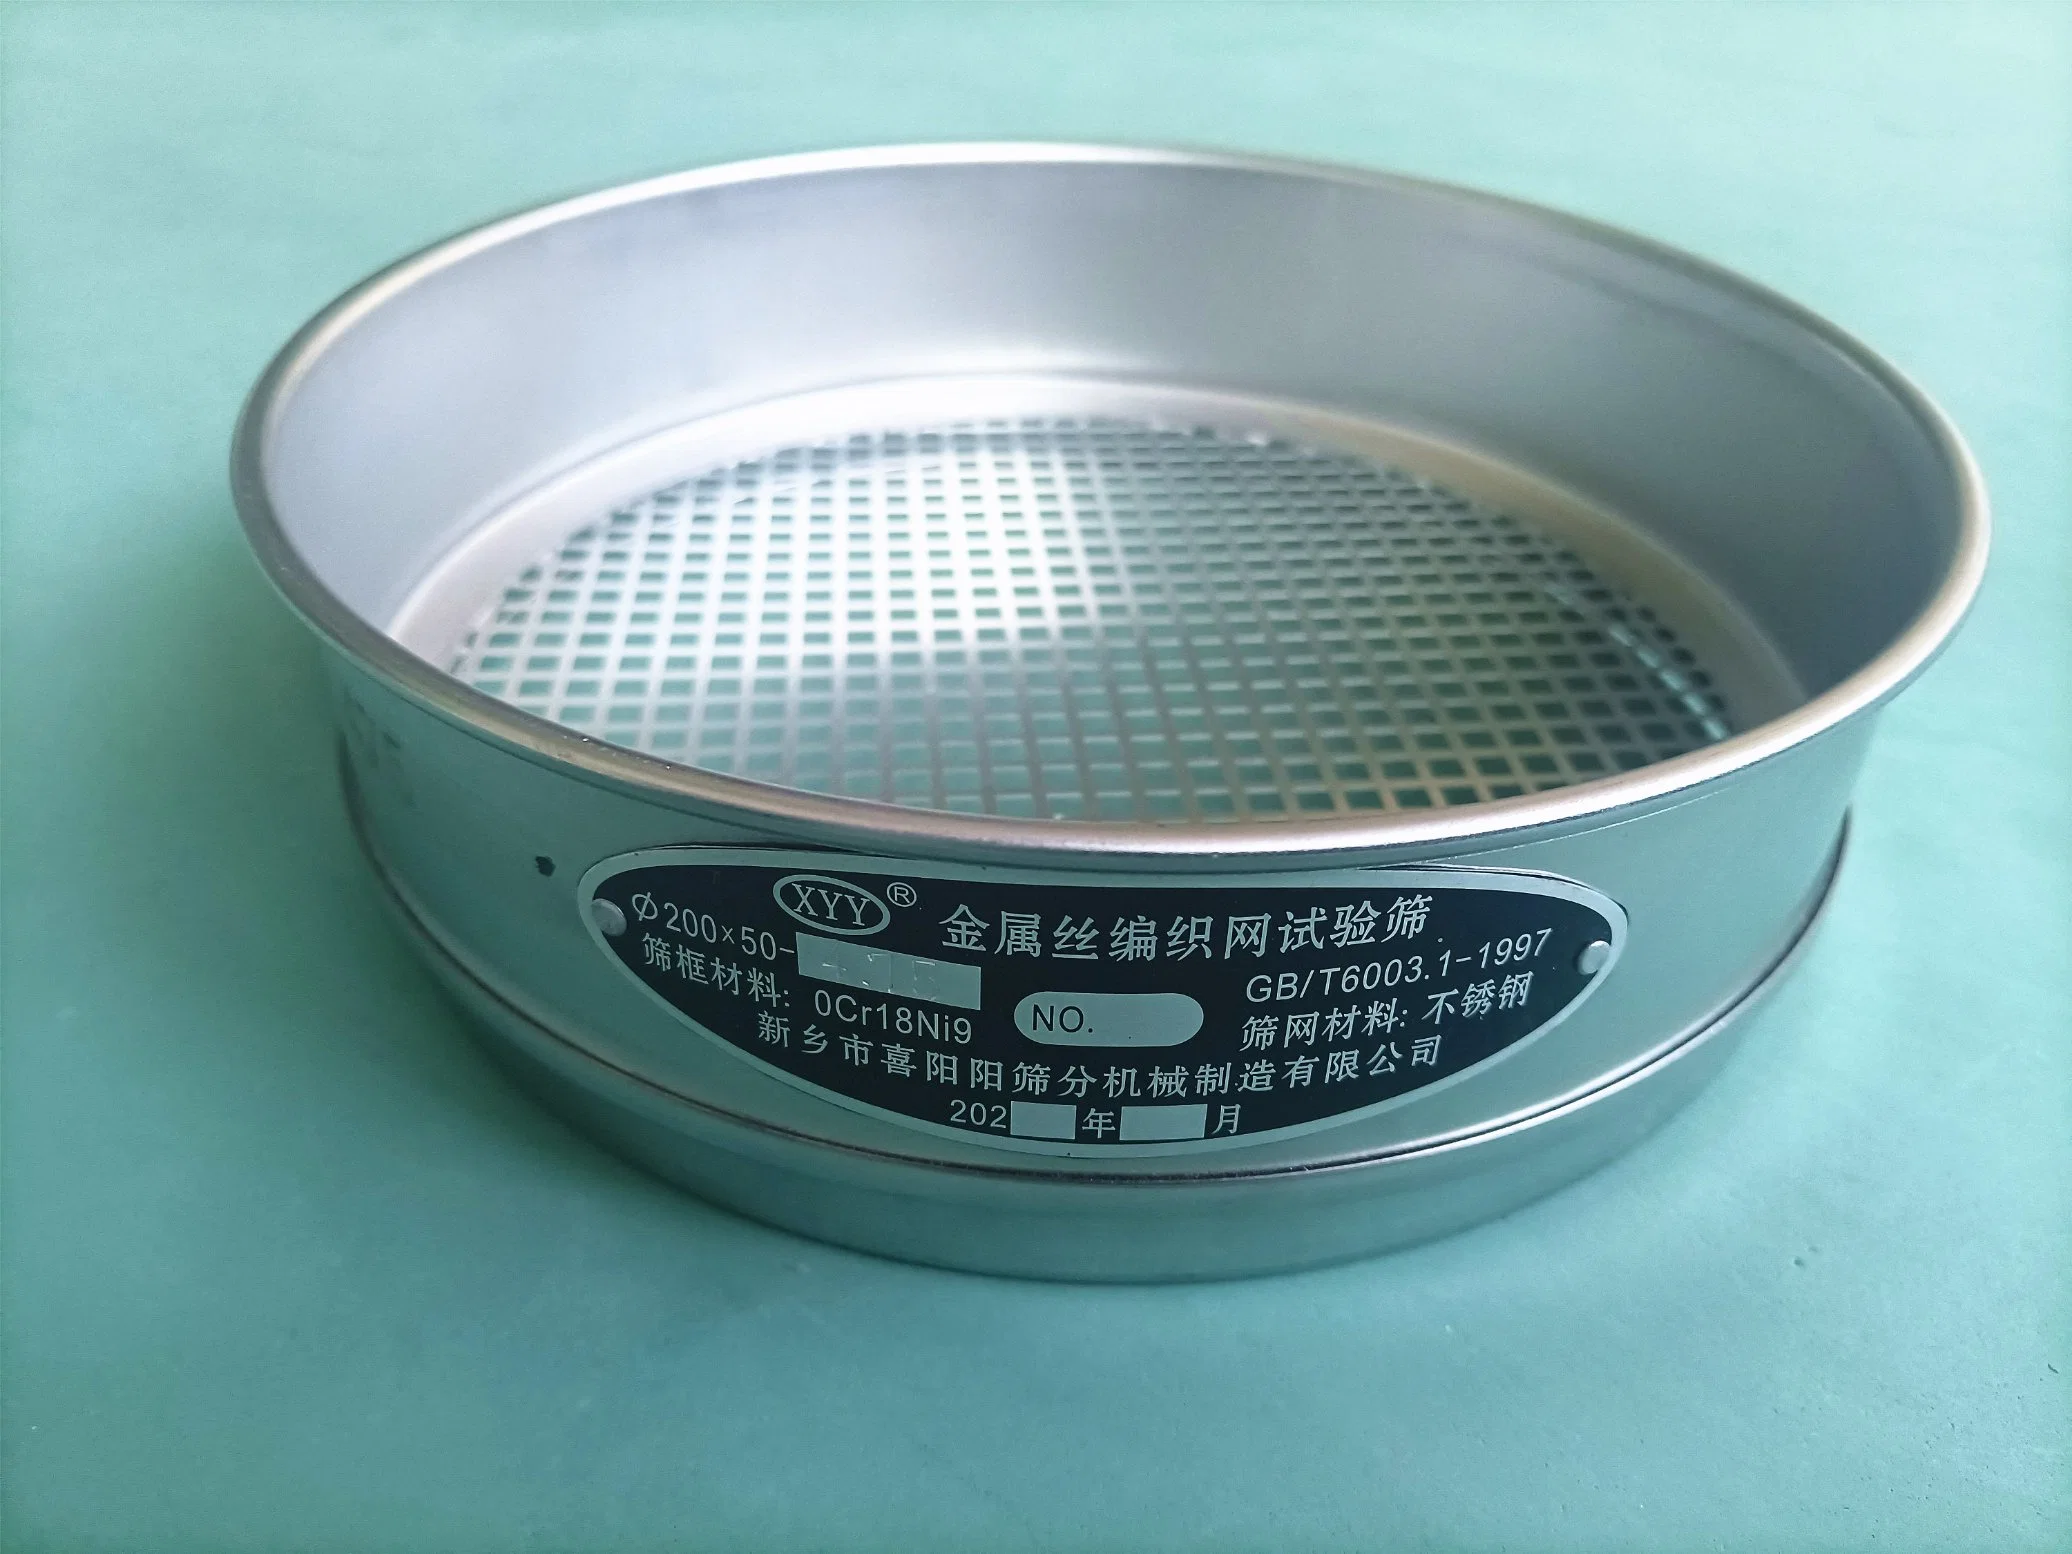 Laboratory Woven Wire Mesh Stainless Steel Screen Test Sieve for Soil Testing